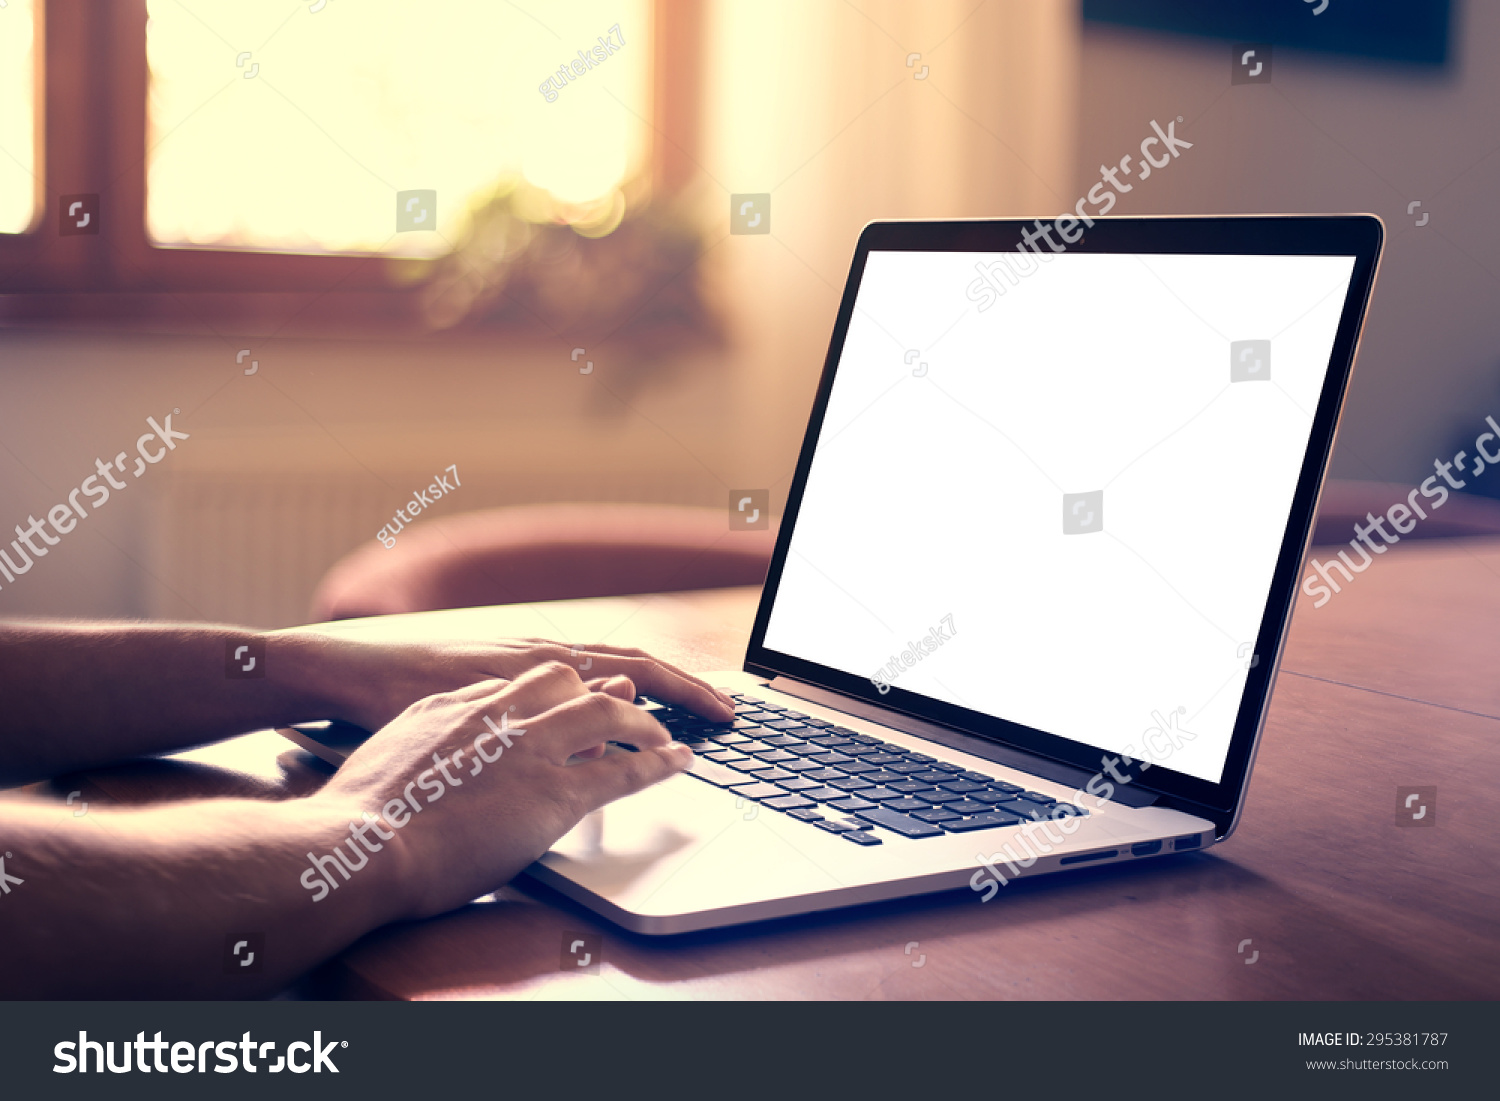 Man's hands using laptop with blank screen on desk in home interior. #295381787